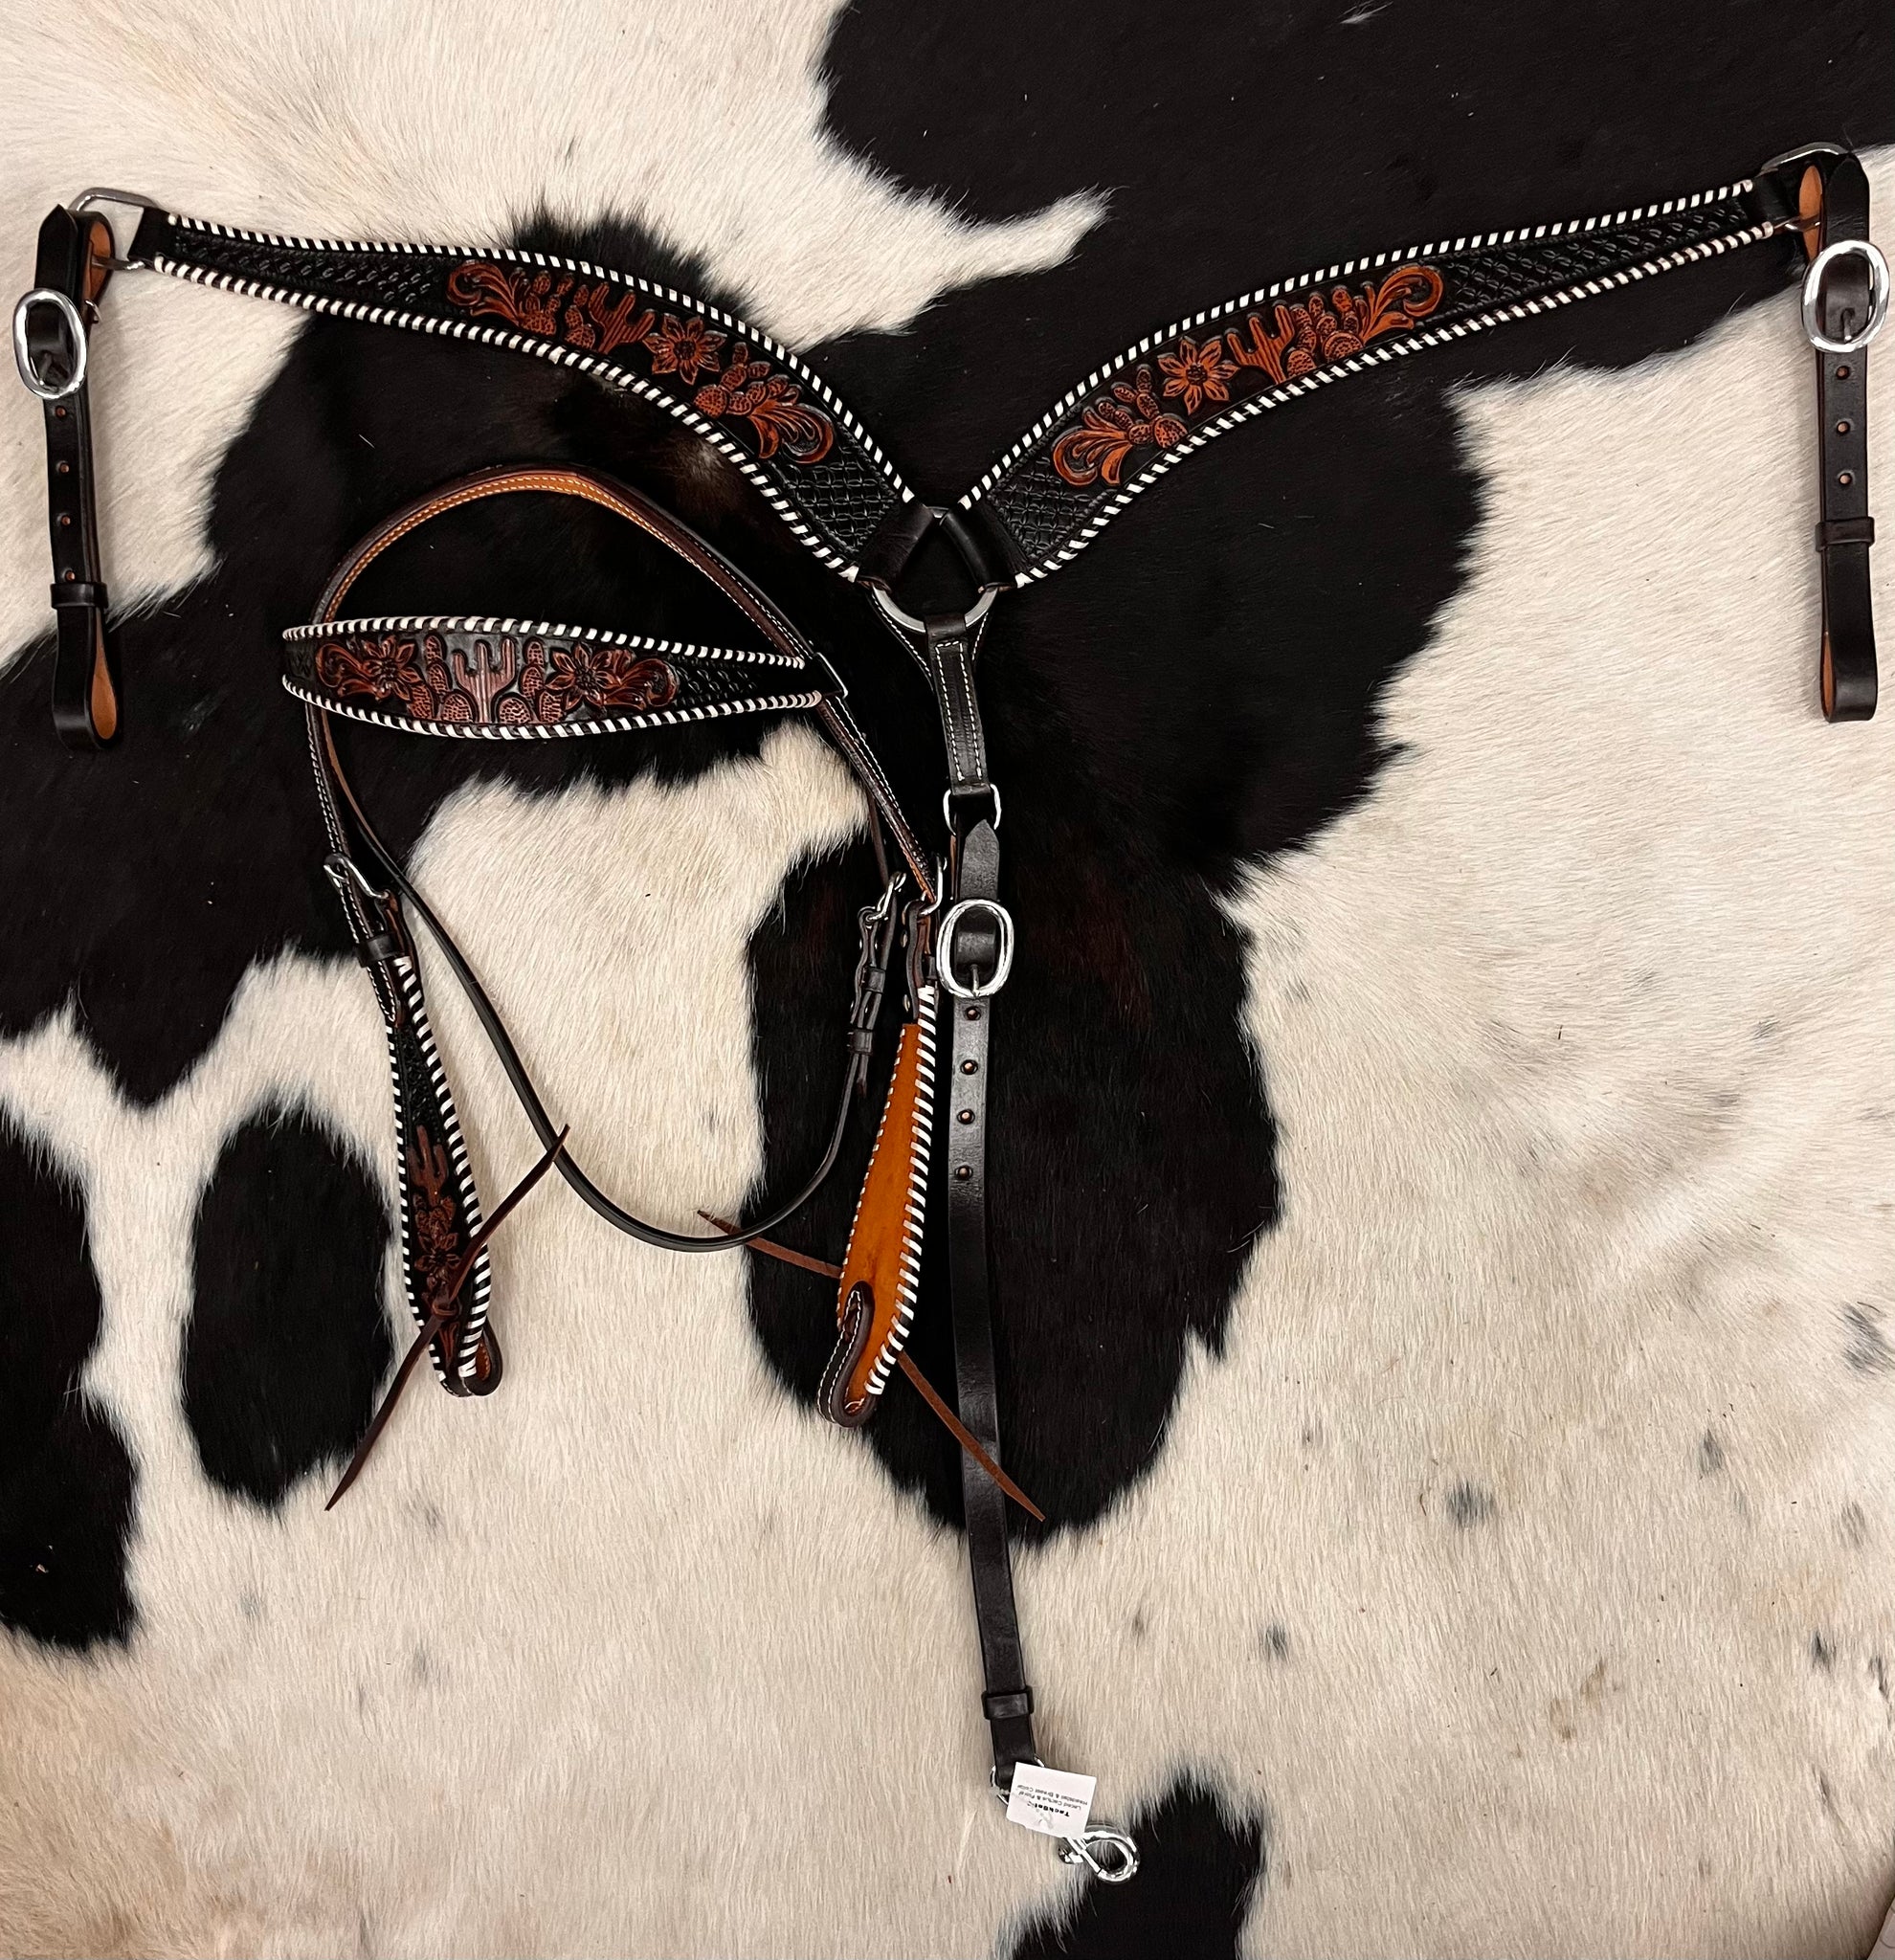 Paul Taylor Tooled Leather Buckstitched Headstall & Breast Collar Set